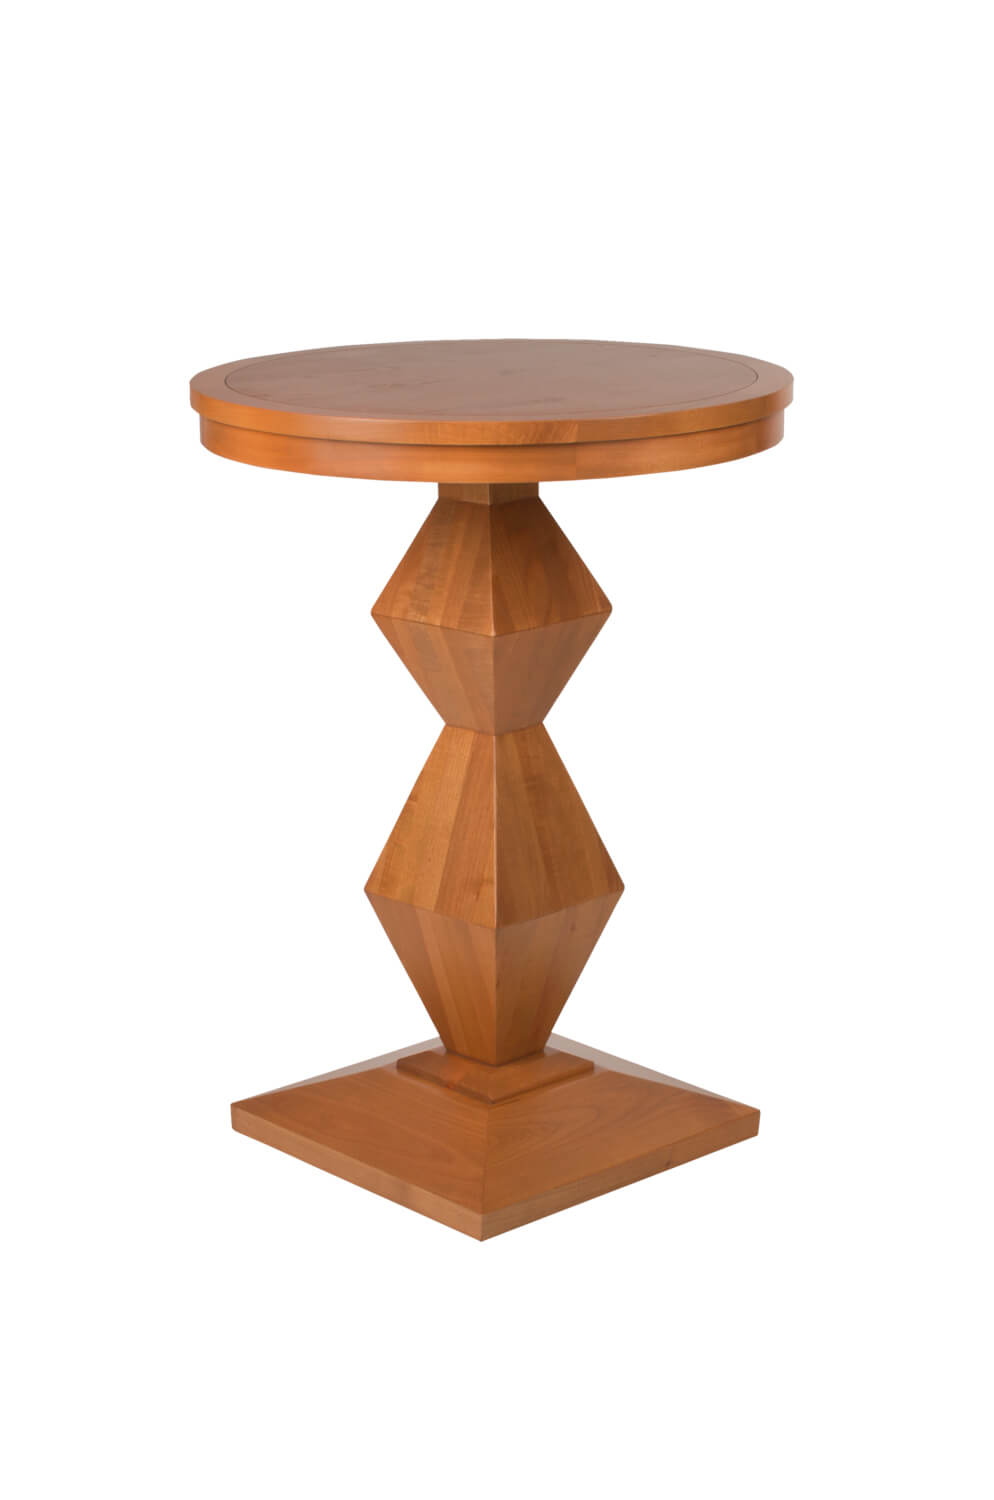 Euclid Wood Pub Table with Round Top